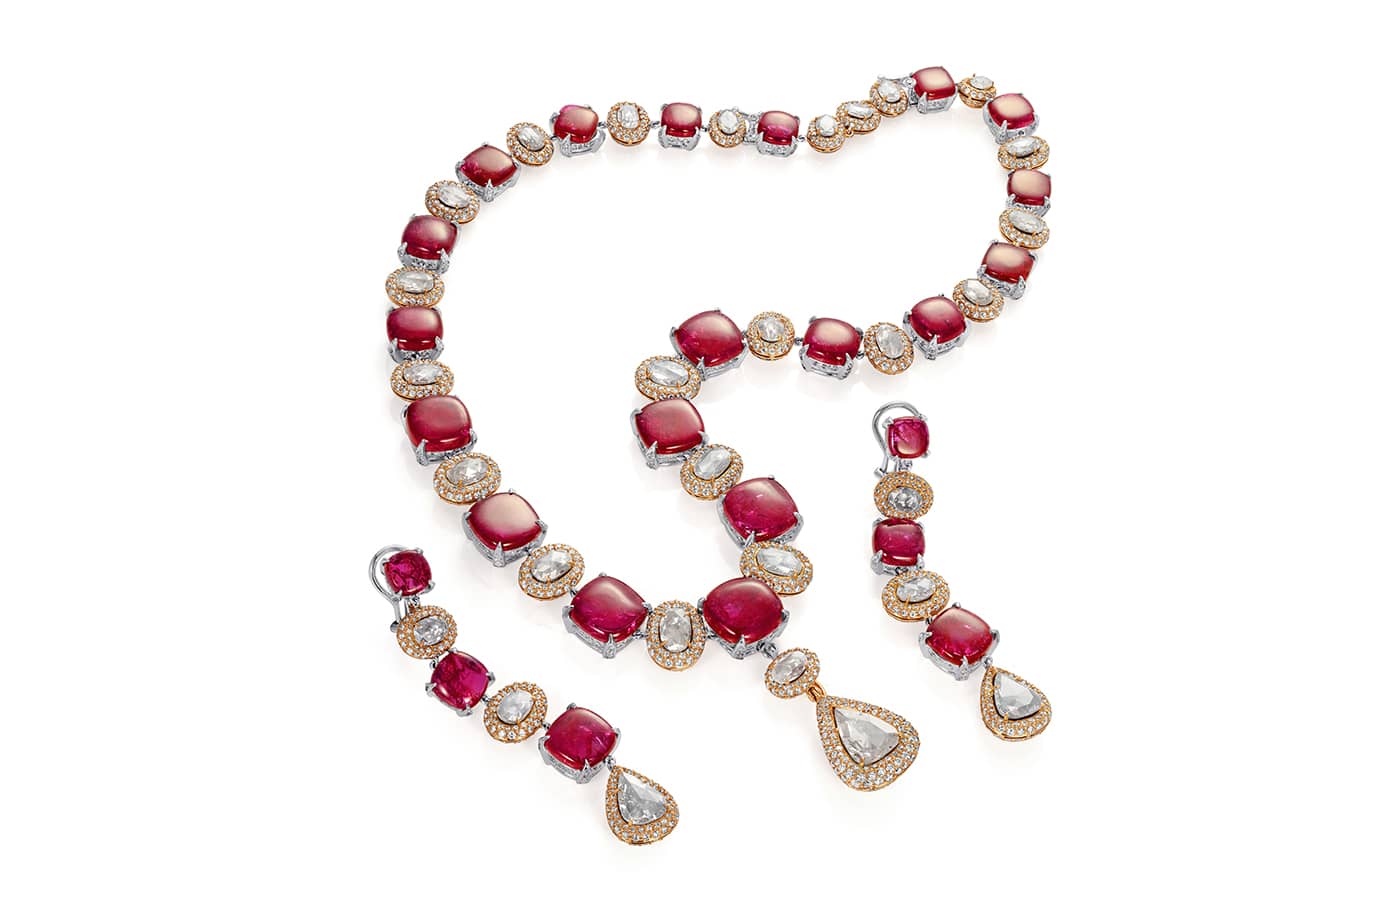 The Lazarus necklace set by Alok Lodha featuring 96.60 cts of cabochon pigeon blood rubies from Mozambique and diamonds